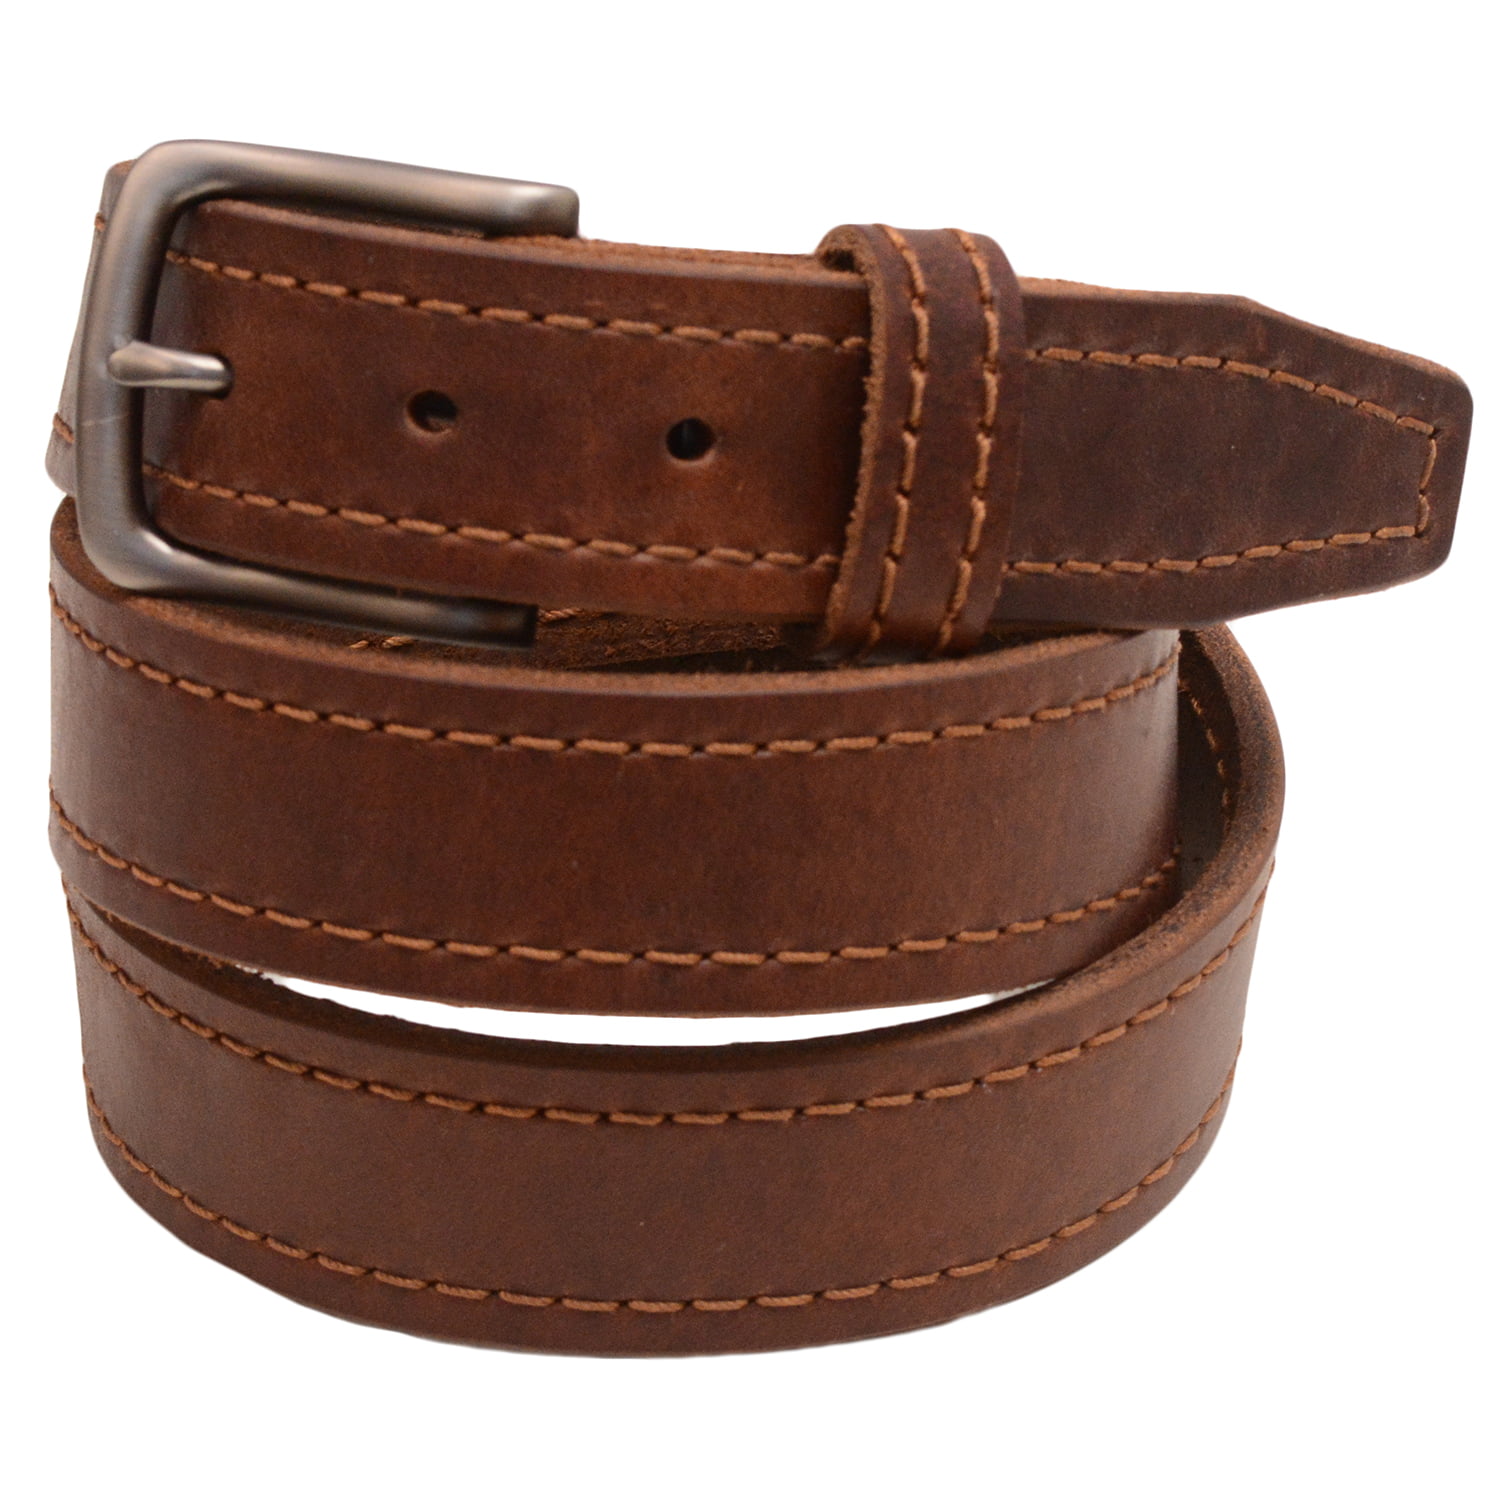 Mens 1 3/8 Walnut Re-Tanned Leather Belt Brown Stitching Natural Edge ...